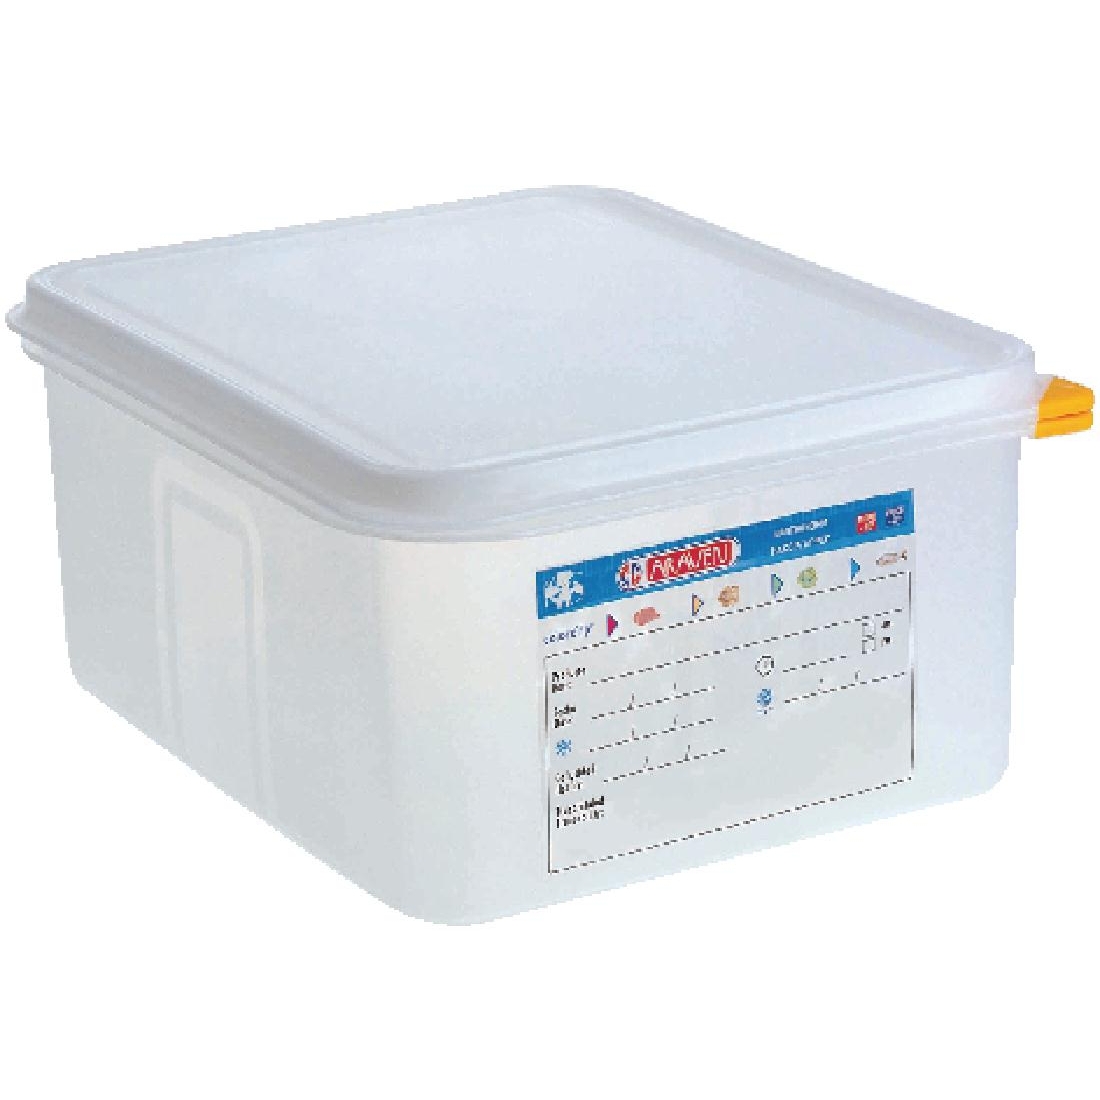 Araven 1/2 GN Food Container 10Ltr